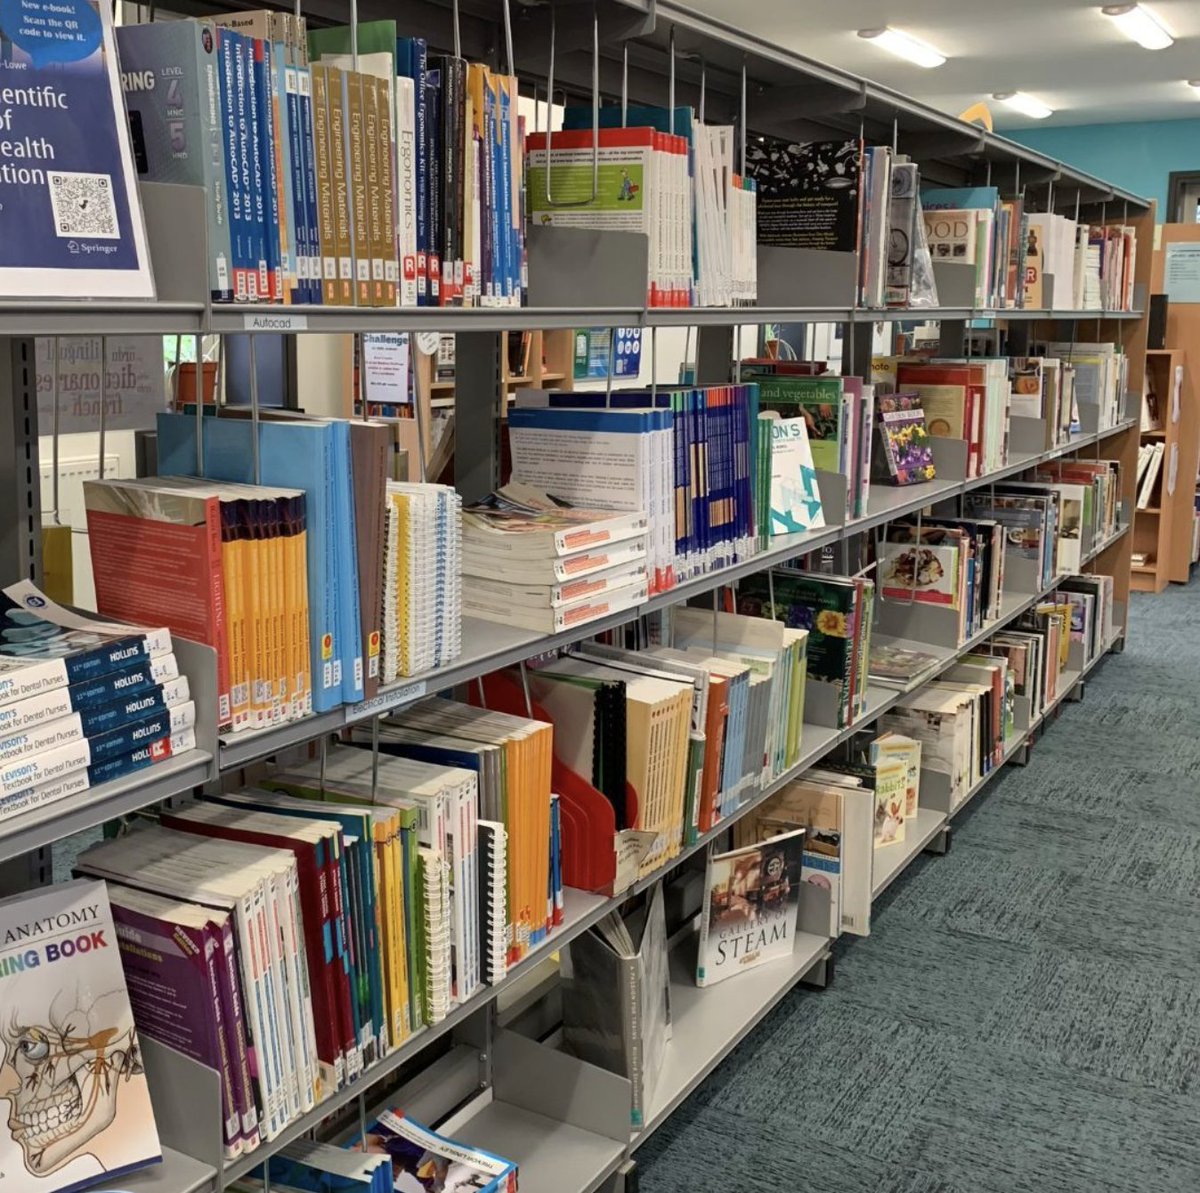 The College provides essential library services across its Abbey Park, St Margaret's, and Freemen’s Park Campuses, supporting student learning and academic success. Learn more: ow.ly/Az8g50Raujk